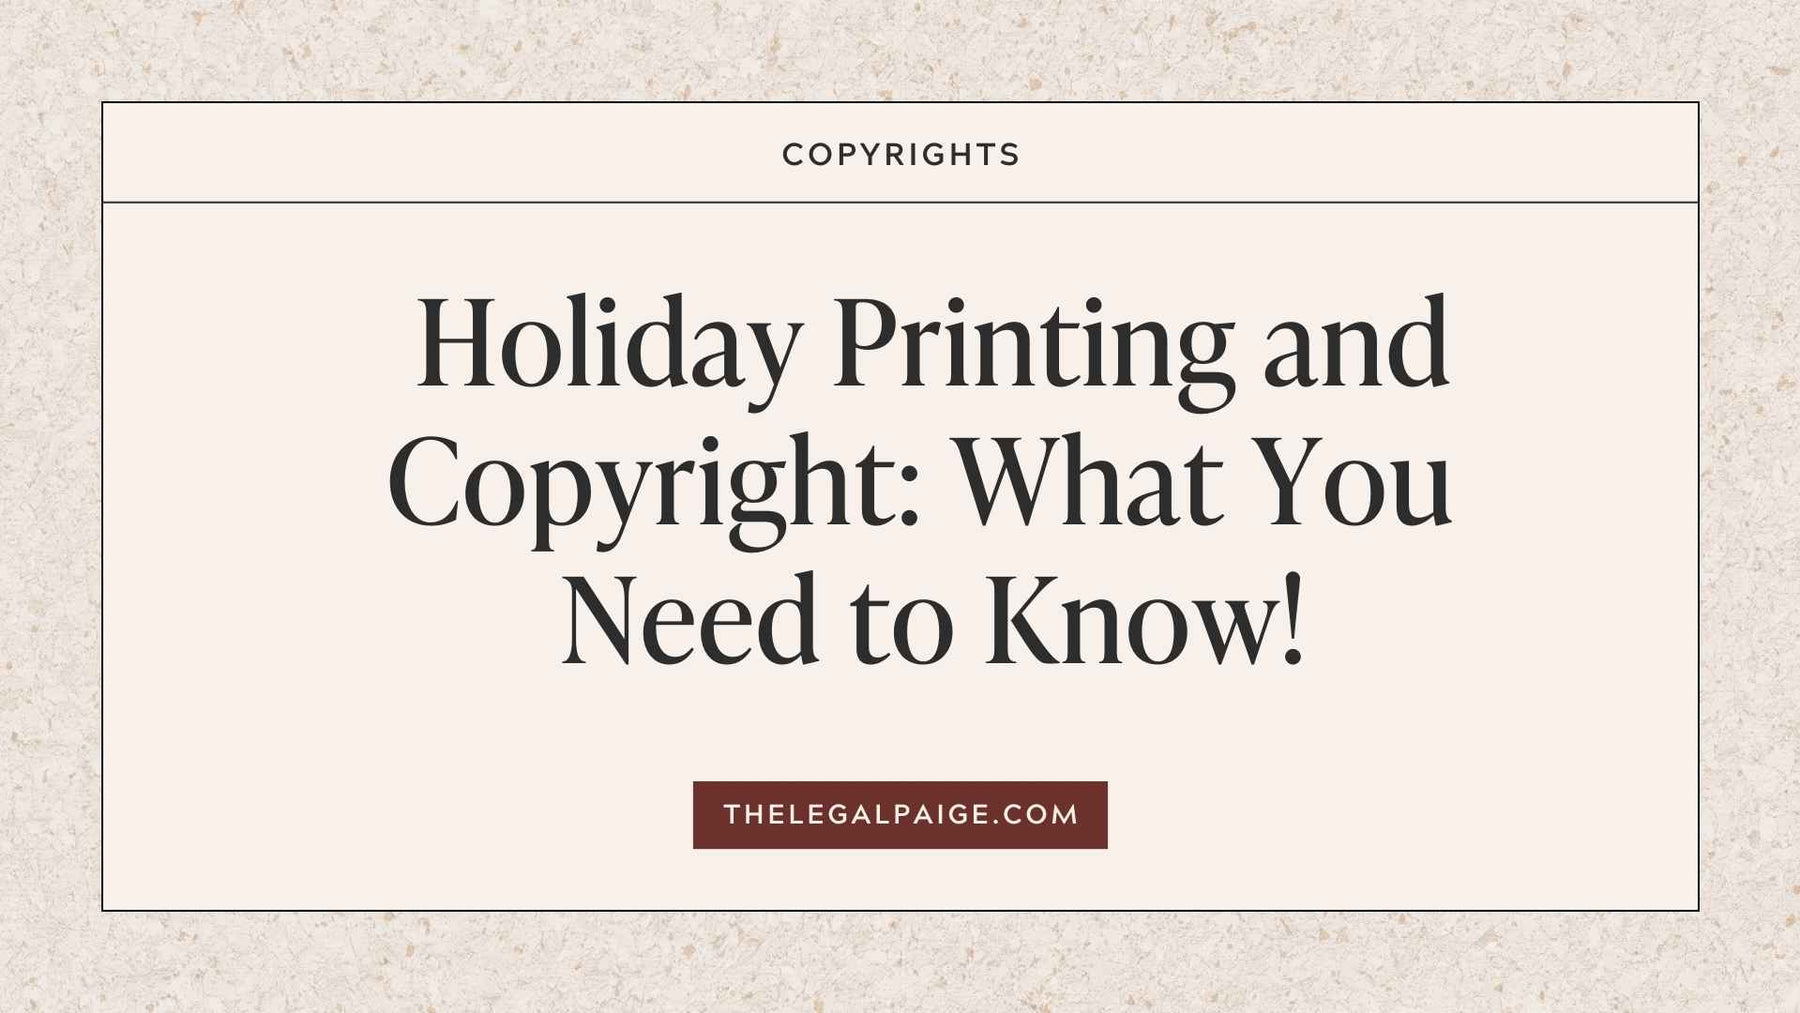 Holiday Printing and Copyright: What You Need to Know!